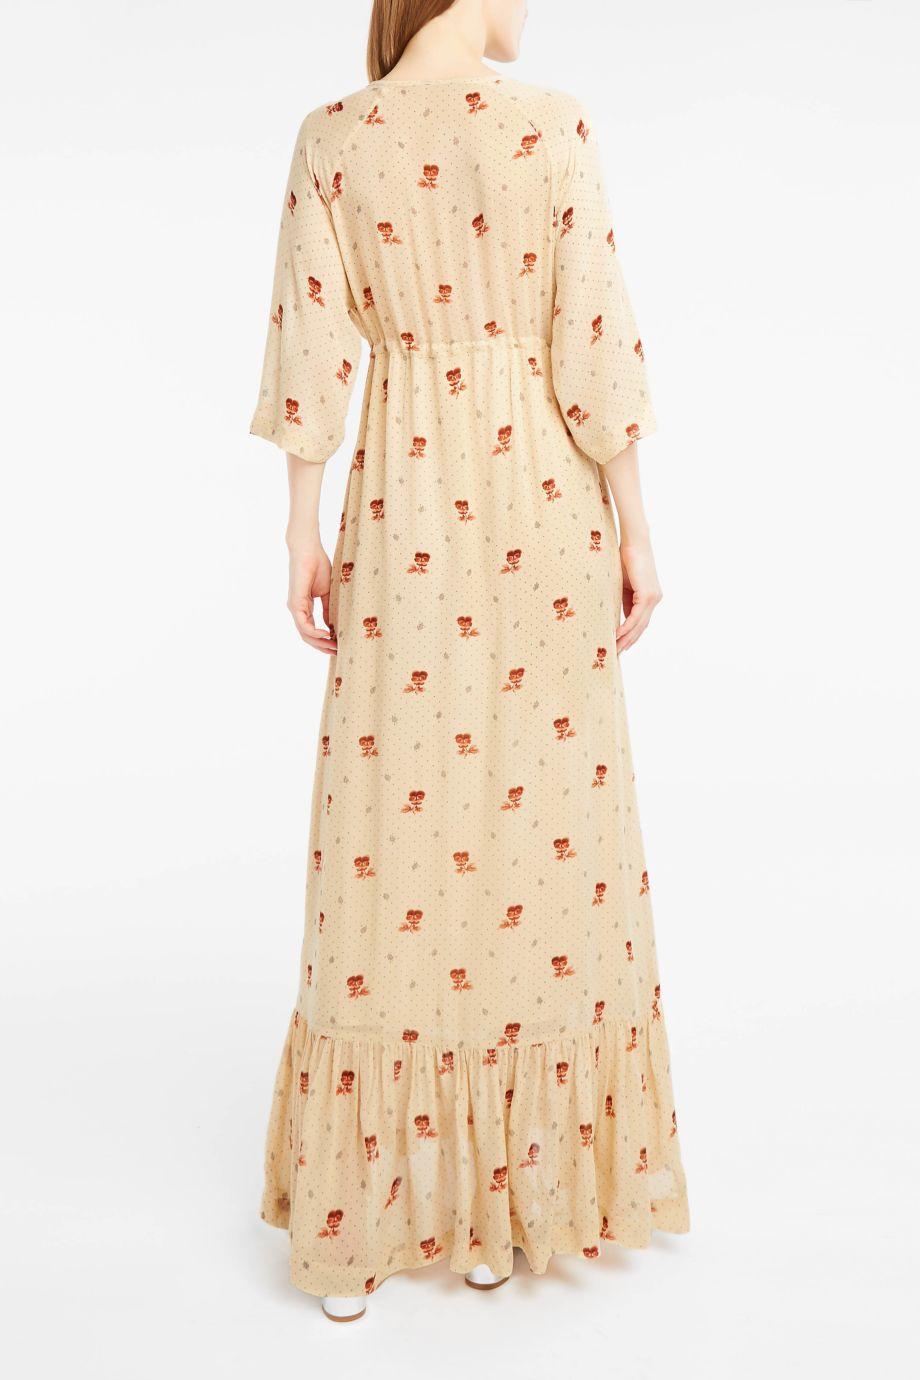 Ganni Synthetic Newman Georgette Maxi Dress in Natural - Lyst